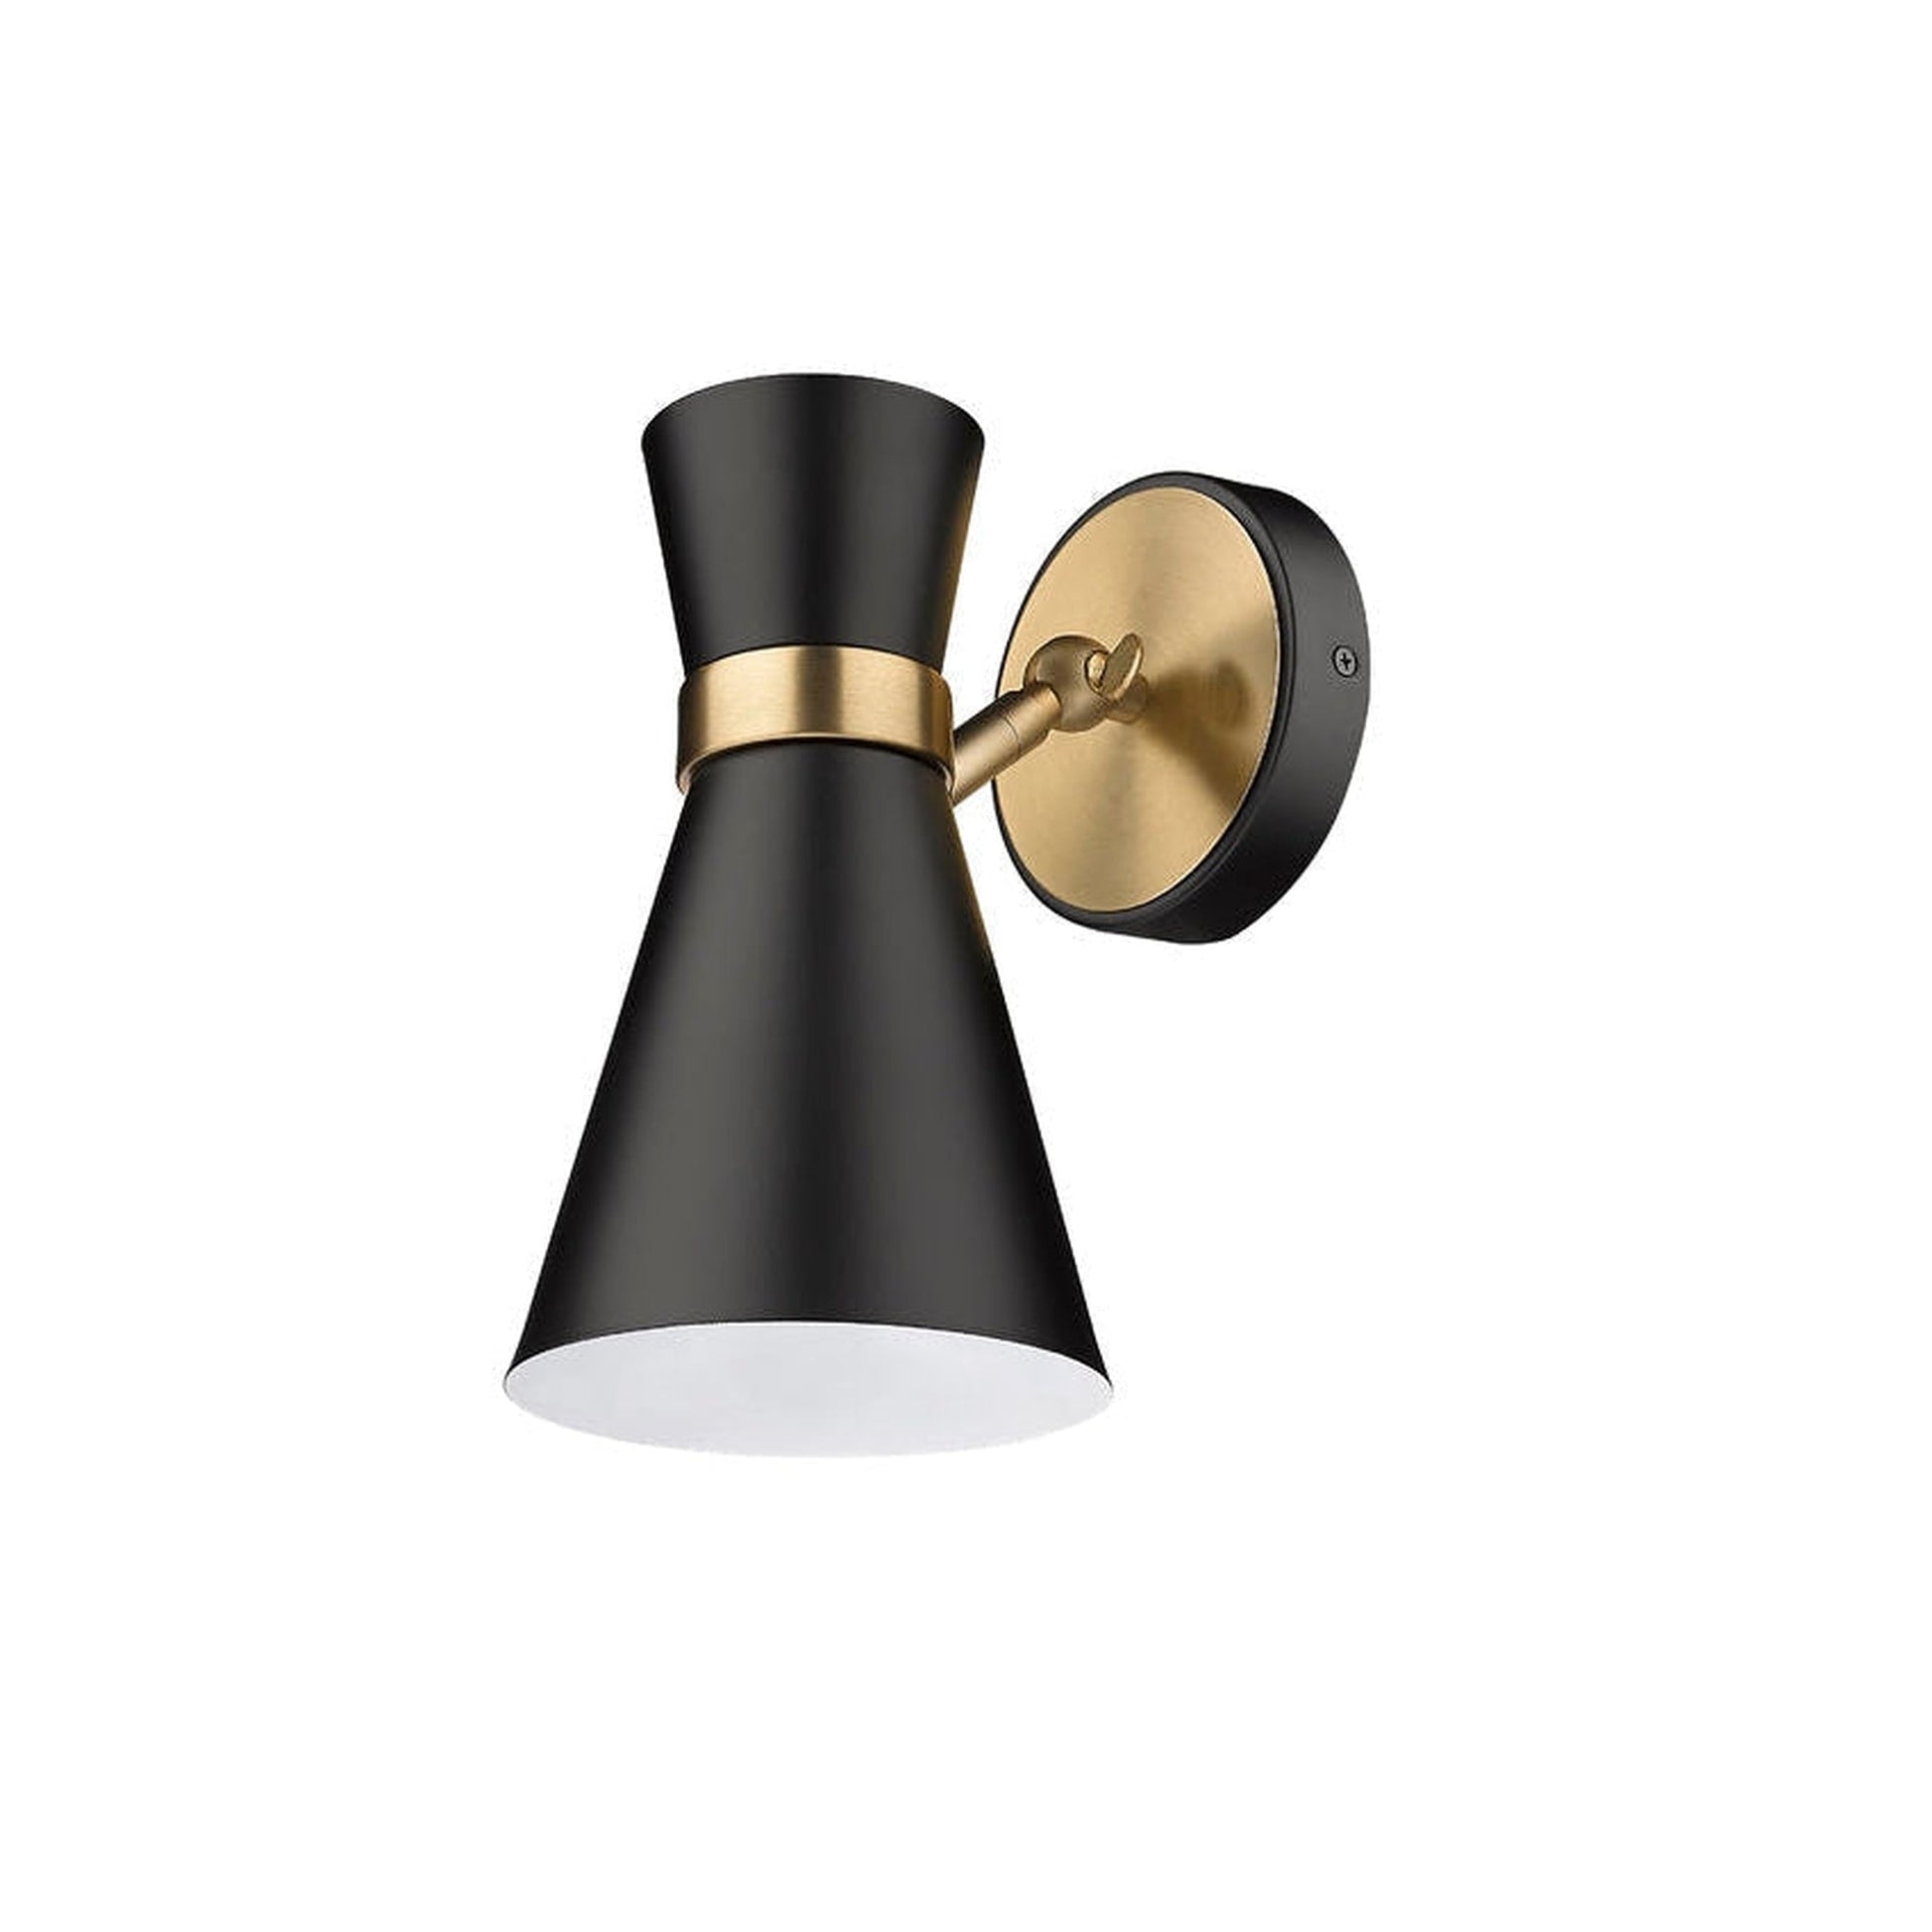 Z-Lite Soriano 6" 1-Light Matte Black and Heritage Brass Wall Sconce With Matte Black Metal Shade